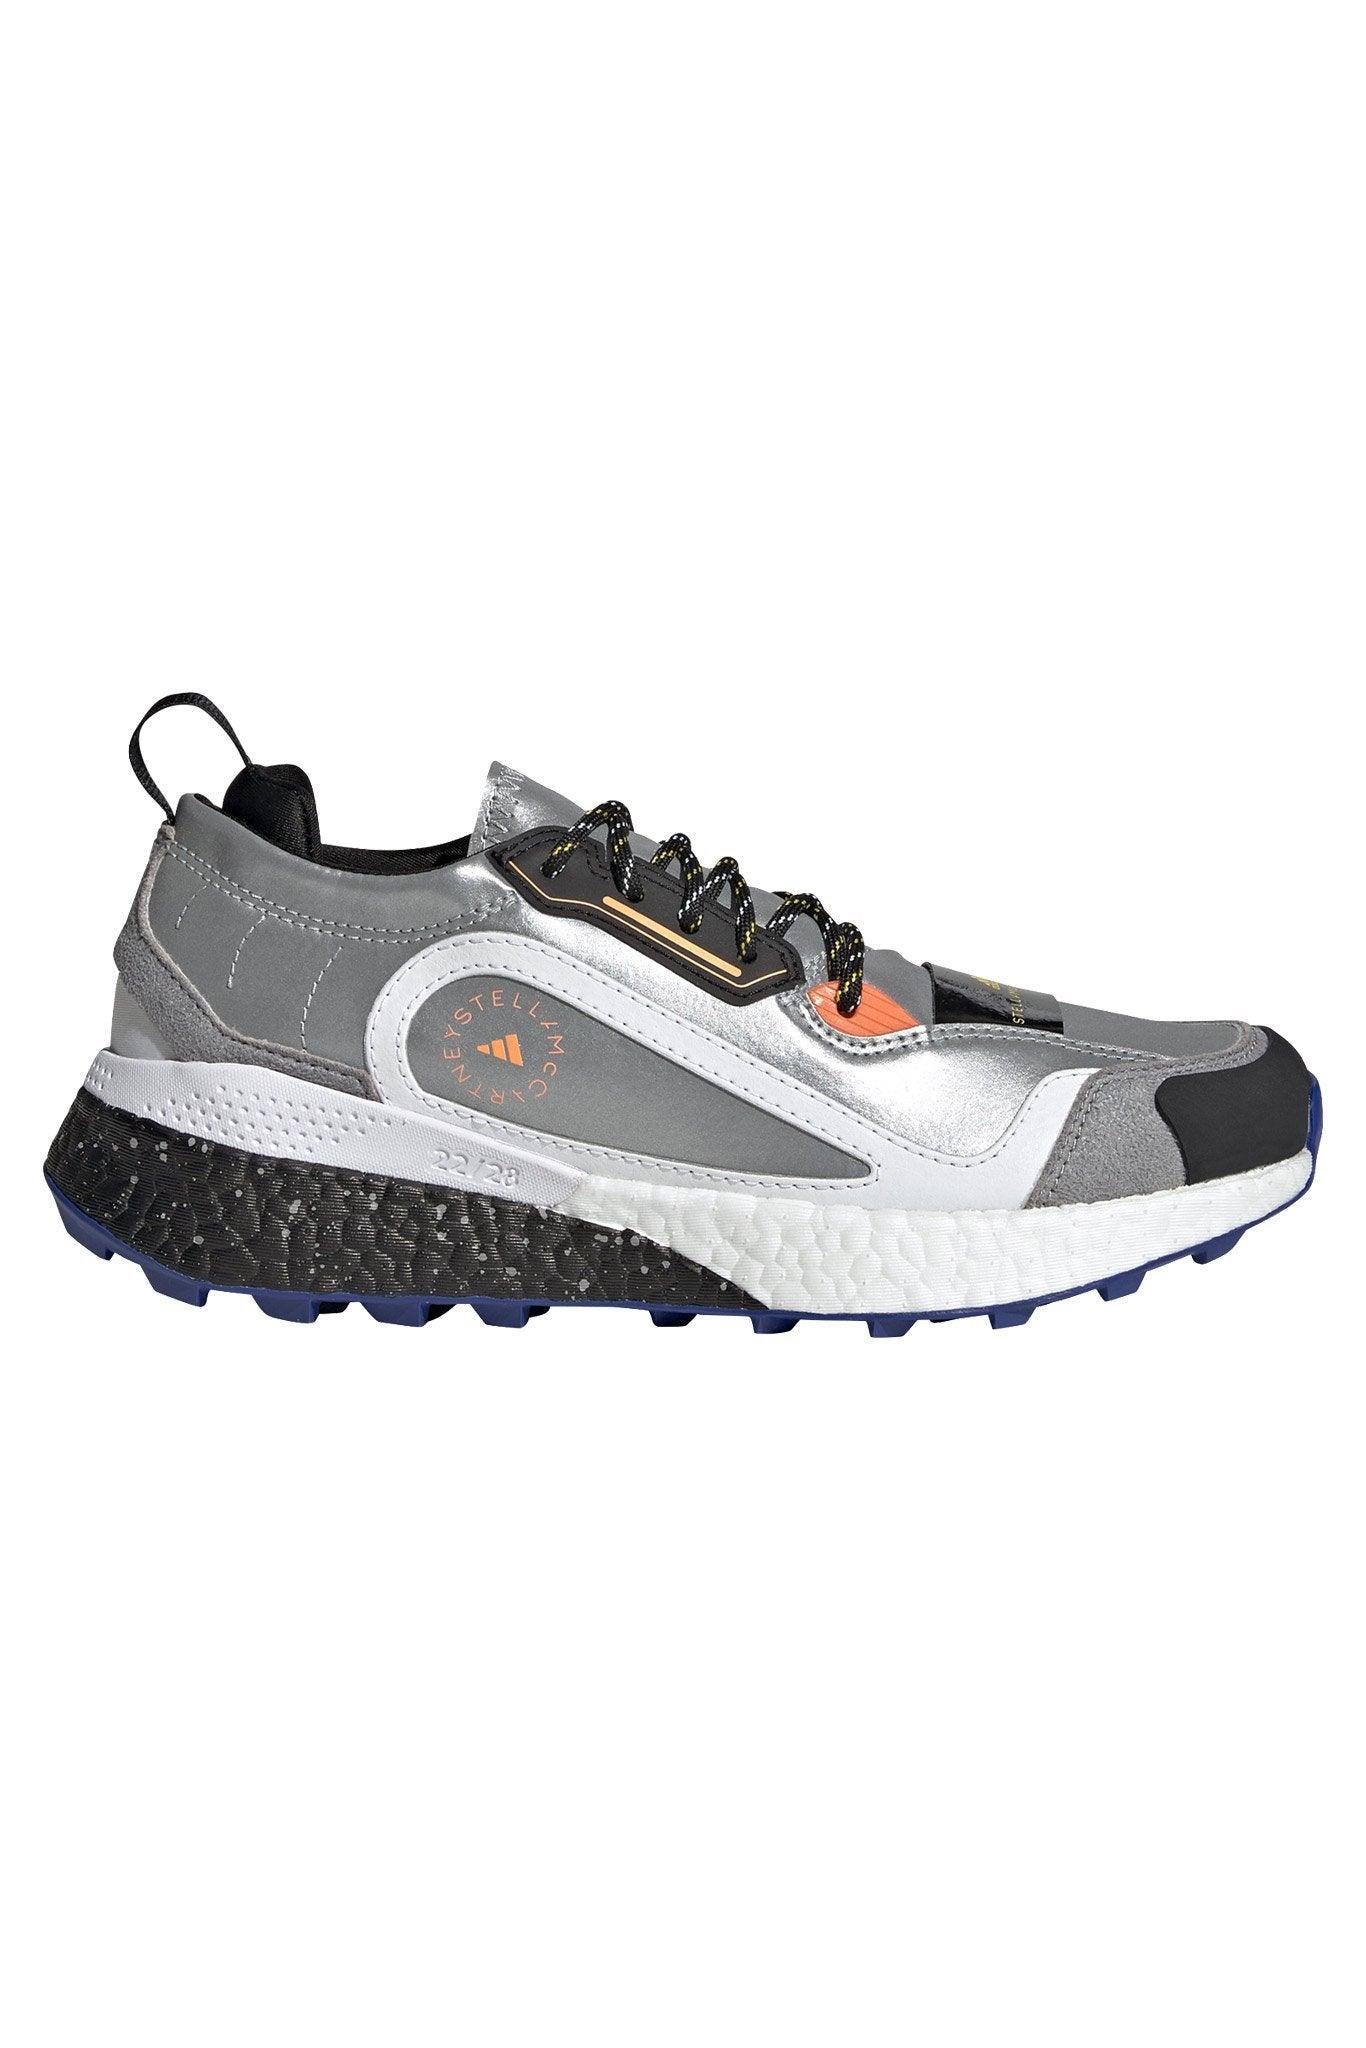 adidas By Stella McCartney Outdoorboost 2.0 Cold.rdy Shoes | Lyst